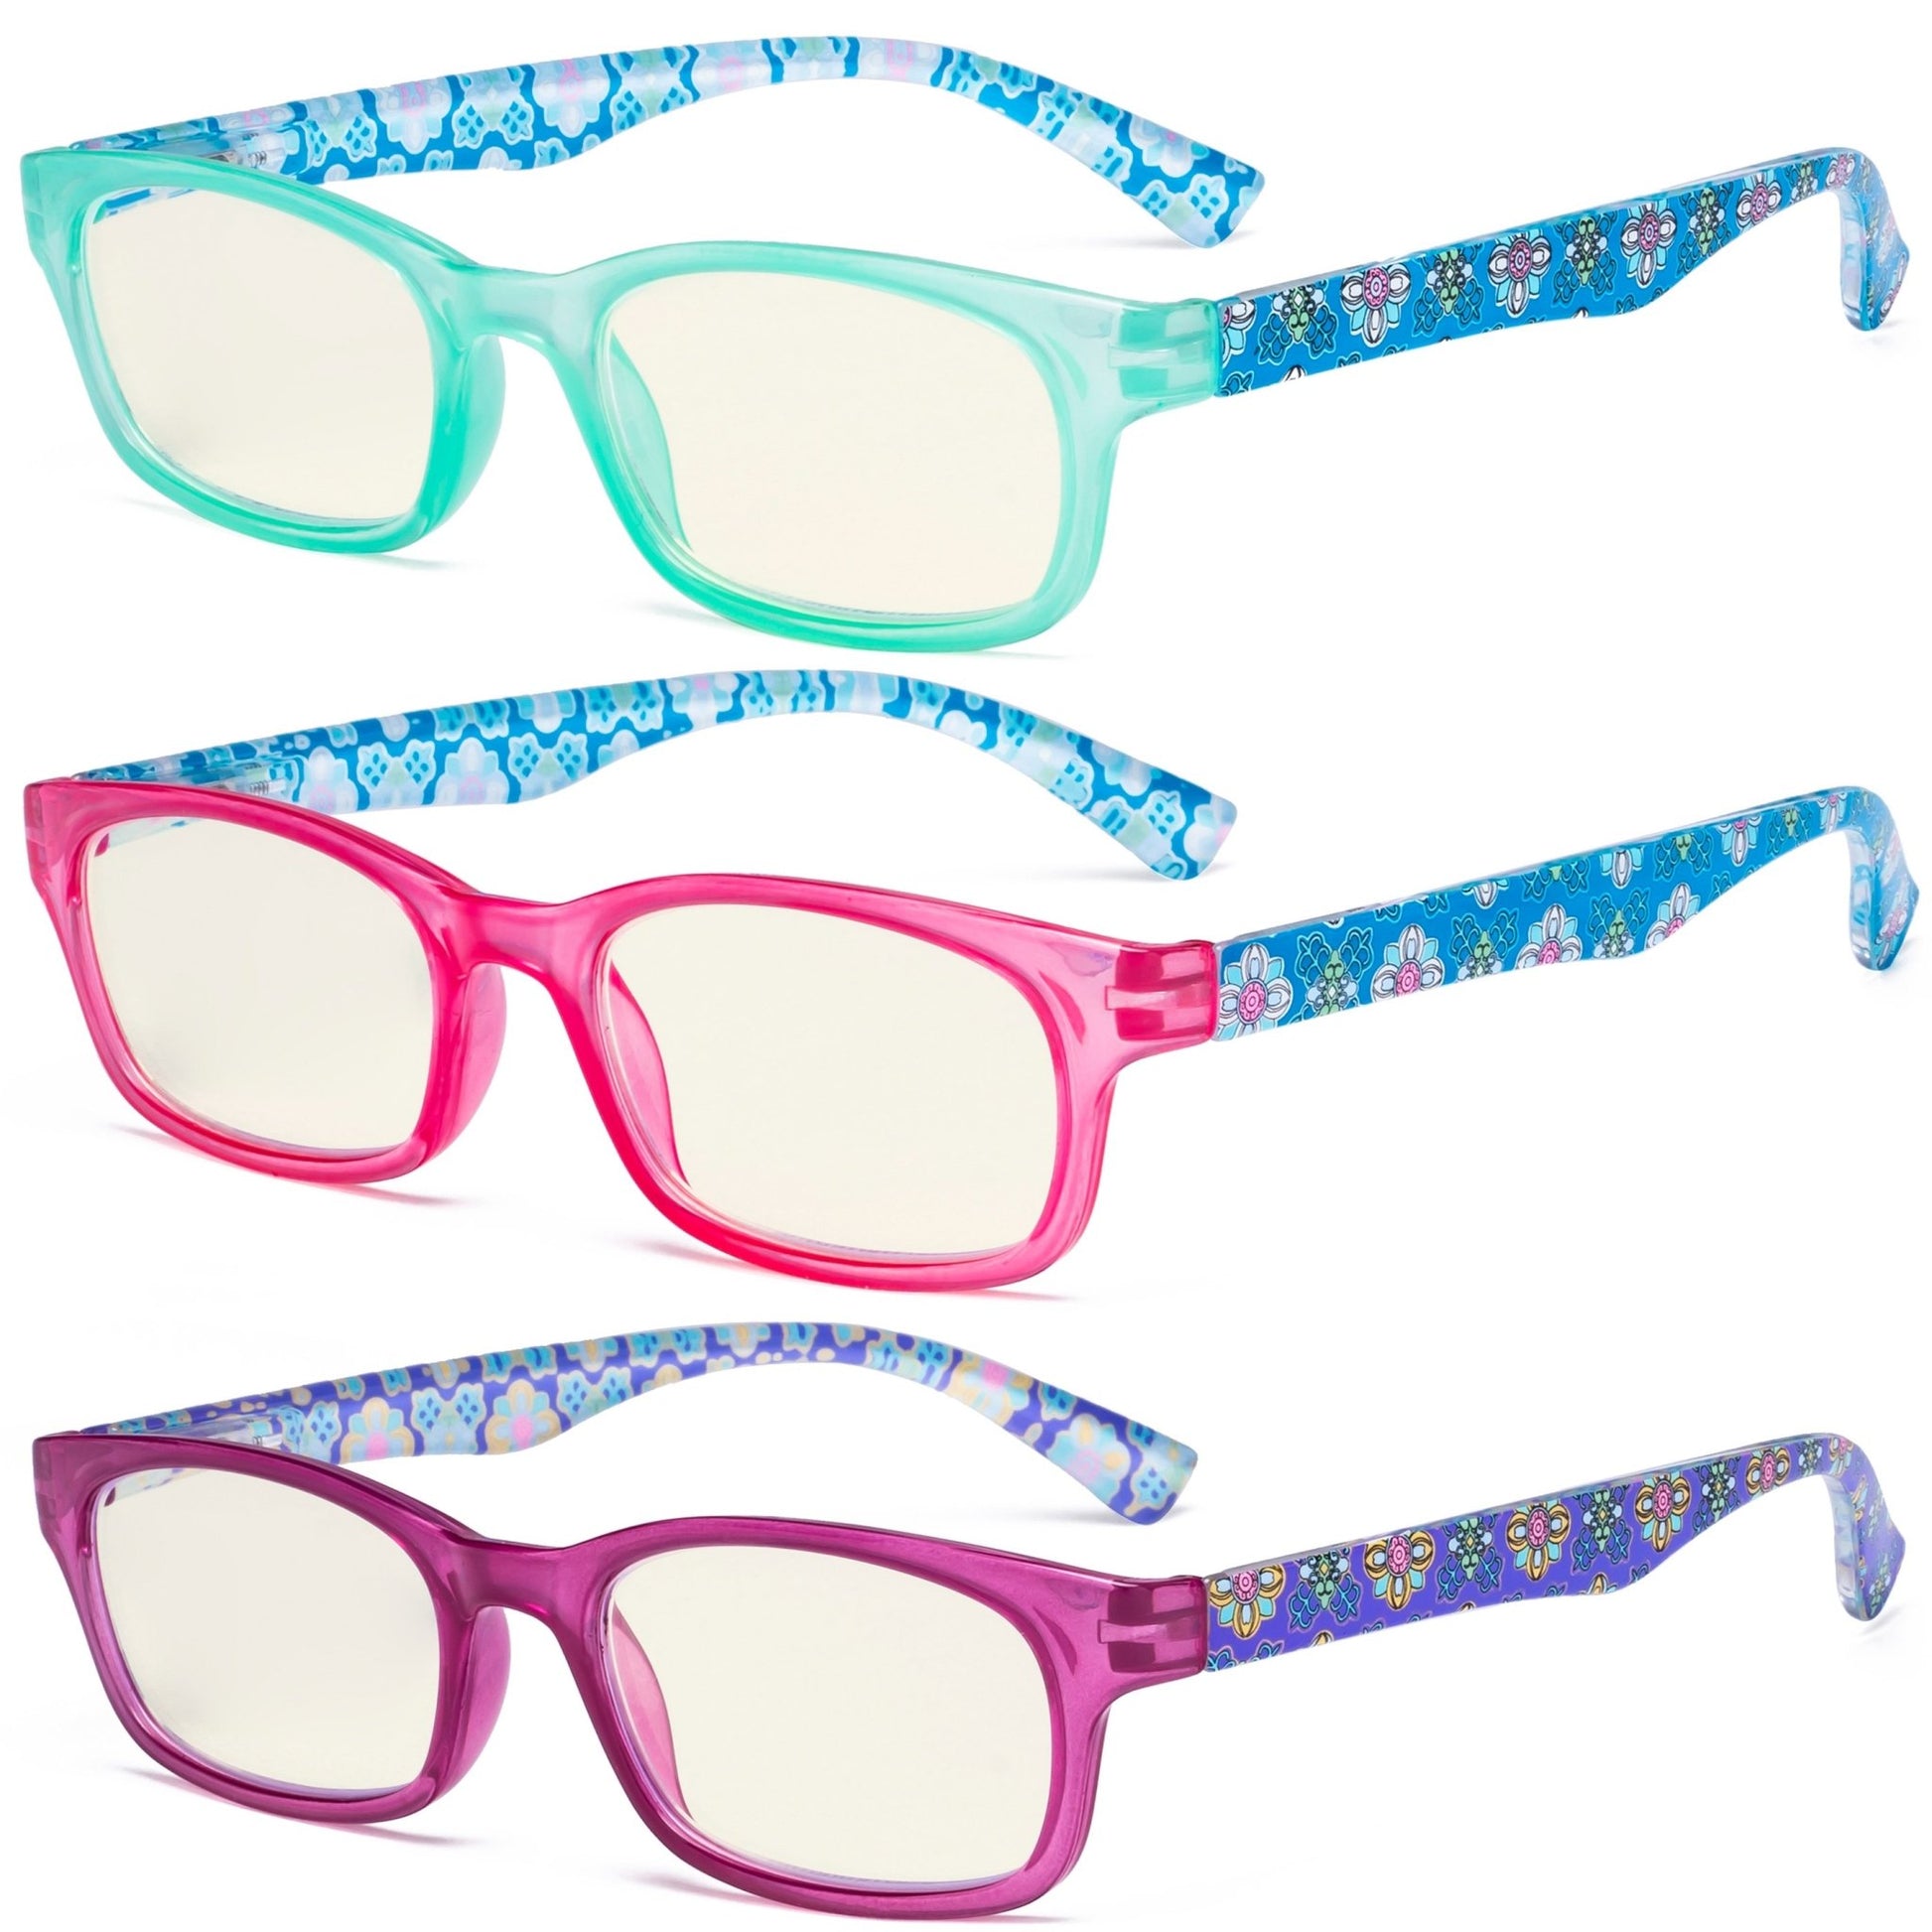 5 Pack Floral Pattern Reading Glasses for Women 5 Pairs Mix / +1.25